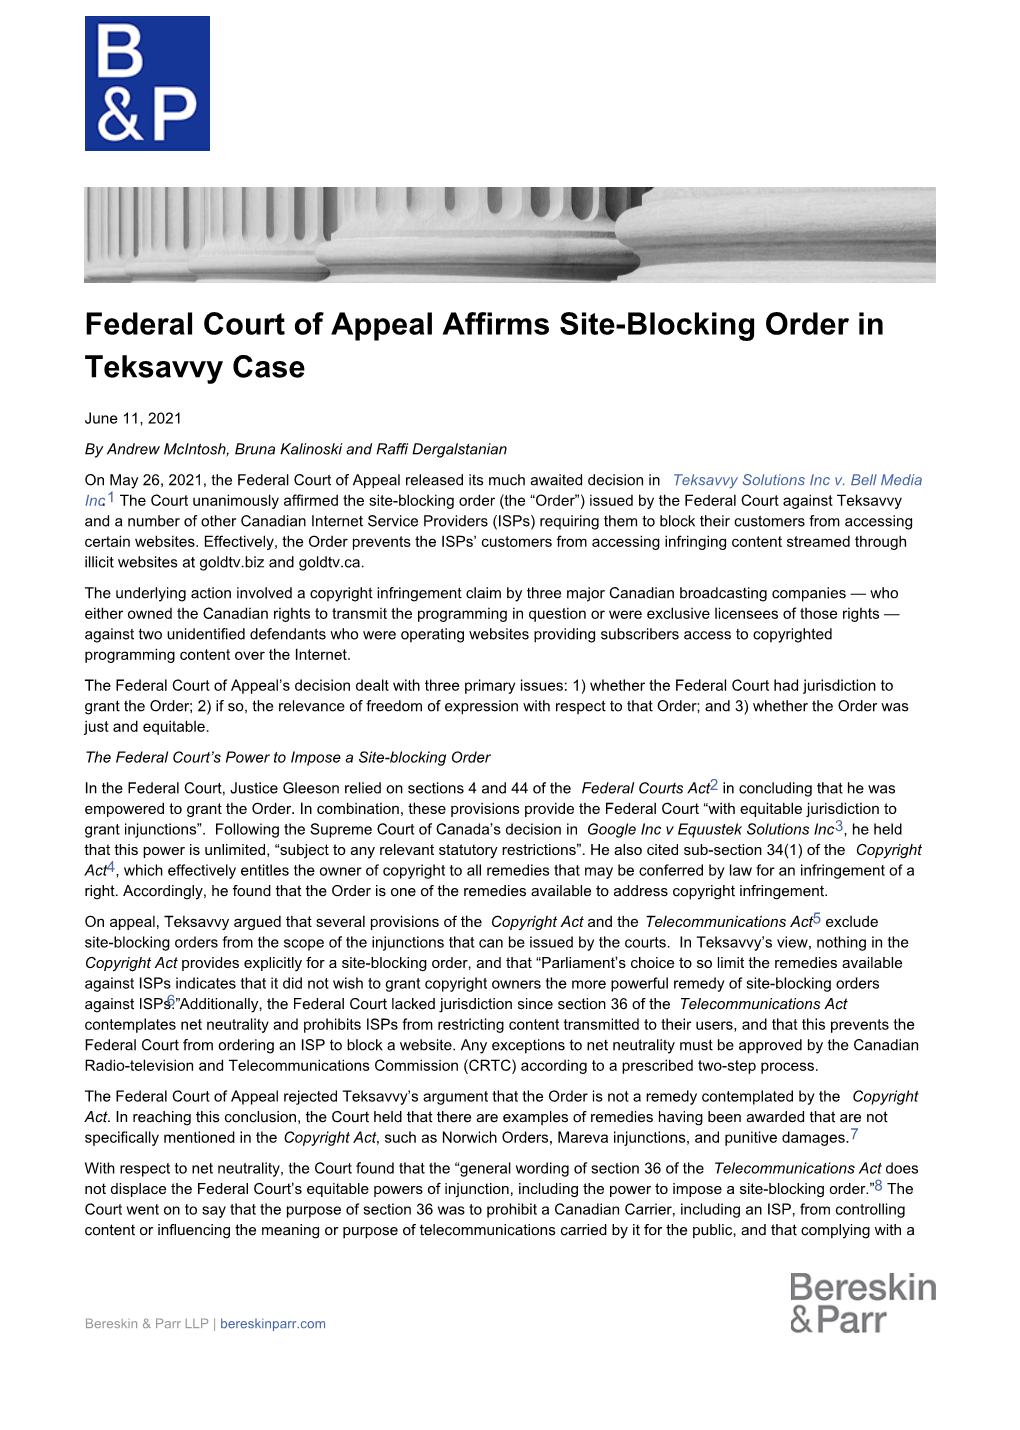 Federal Court of Appeal Affirms Site-Blocking Order in Teksavvy Case